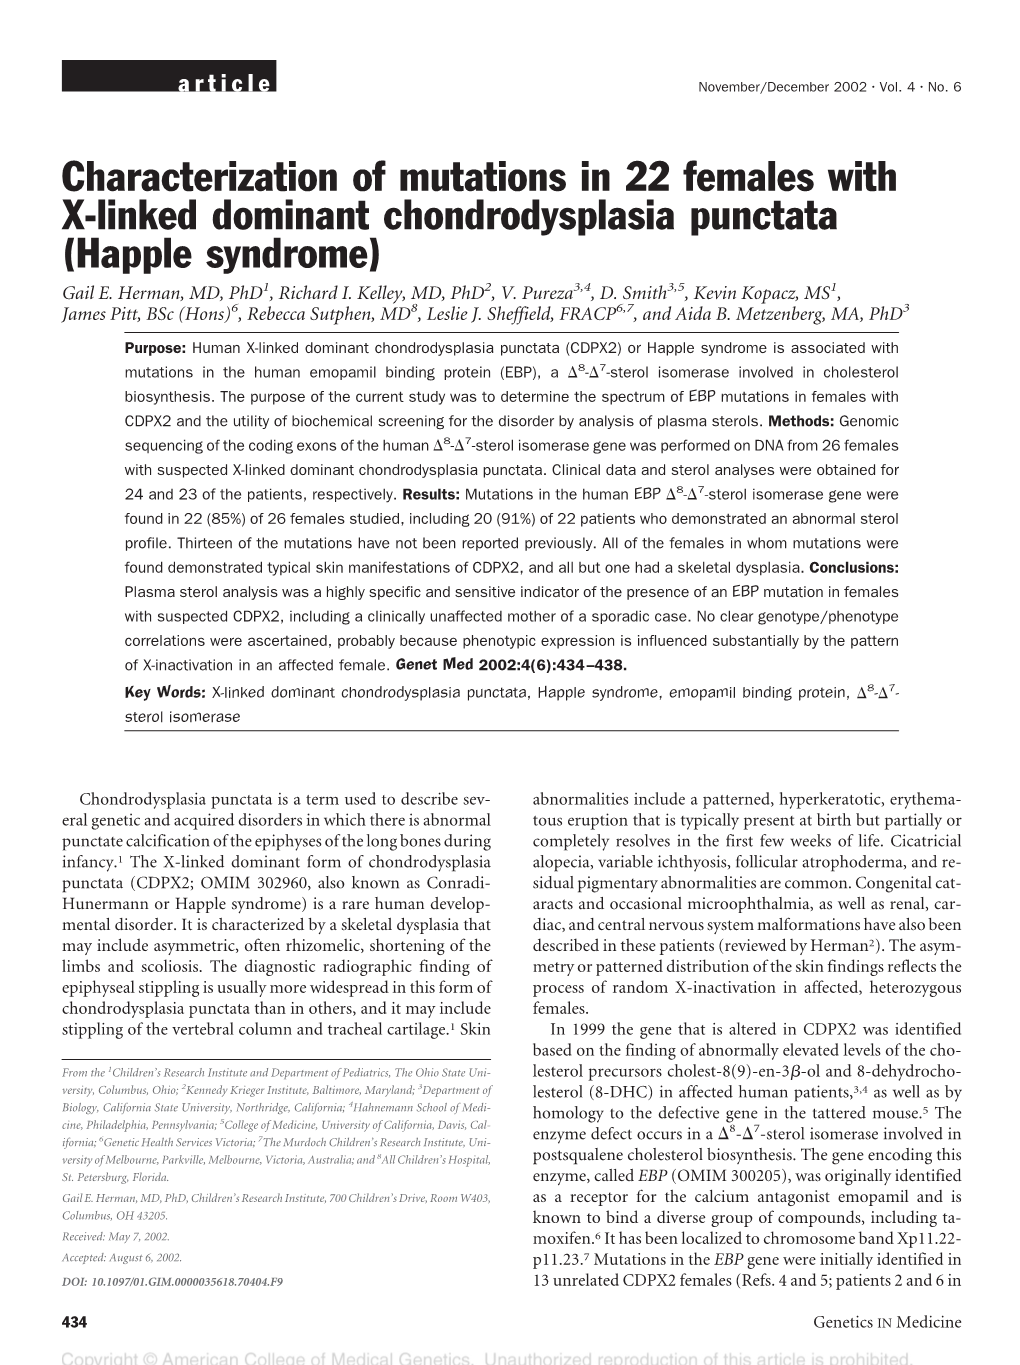 Characterization of Mutations in 22 Females with X-Linked Dominant Chondrodysplasia Punctata (Happle Syndrome) Gail E